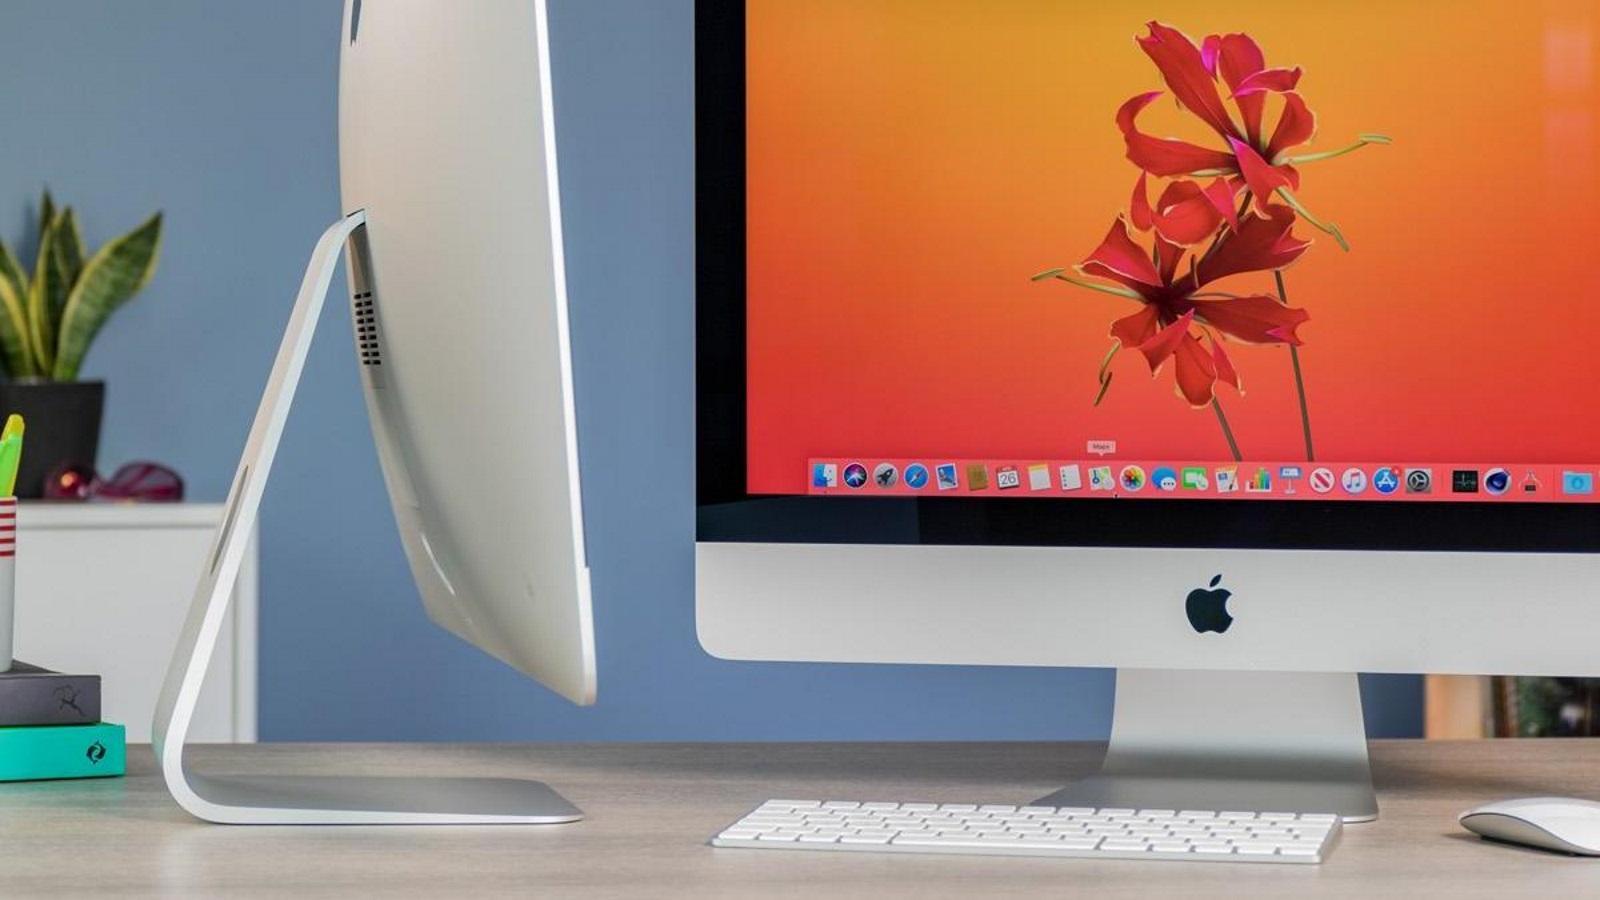 Clean iMac.  How to clear the cache on a Mac